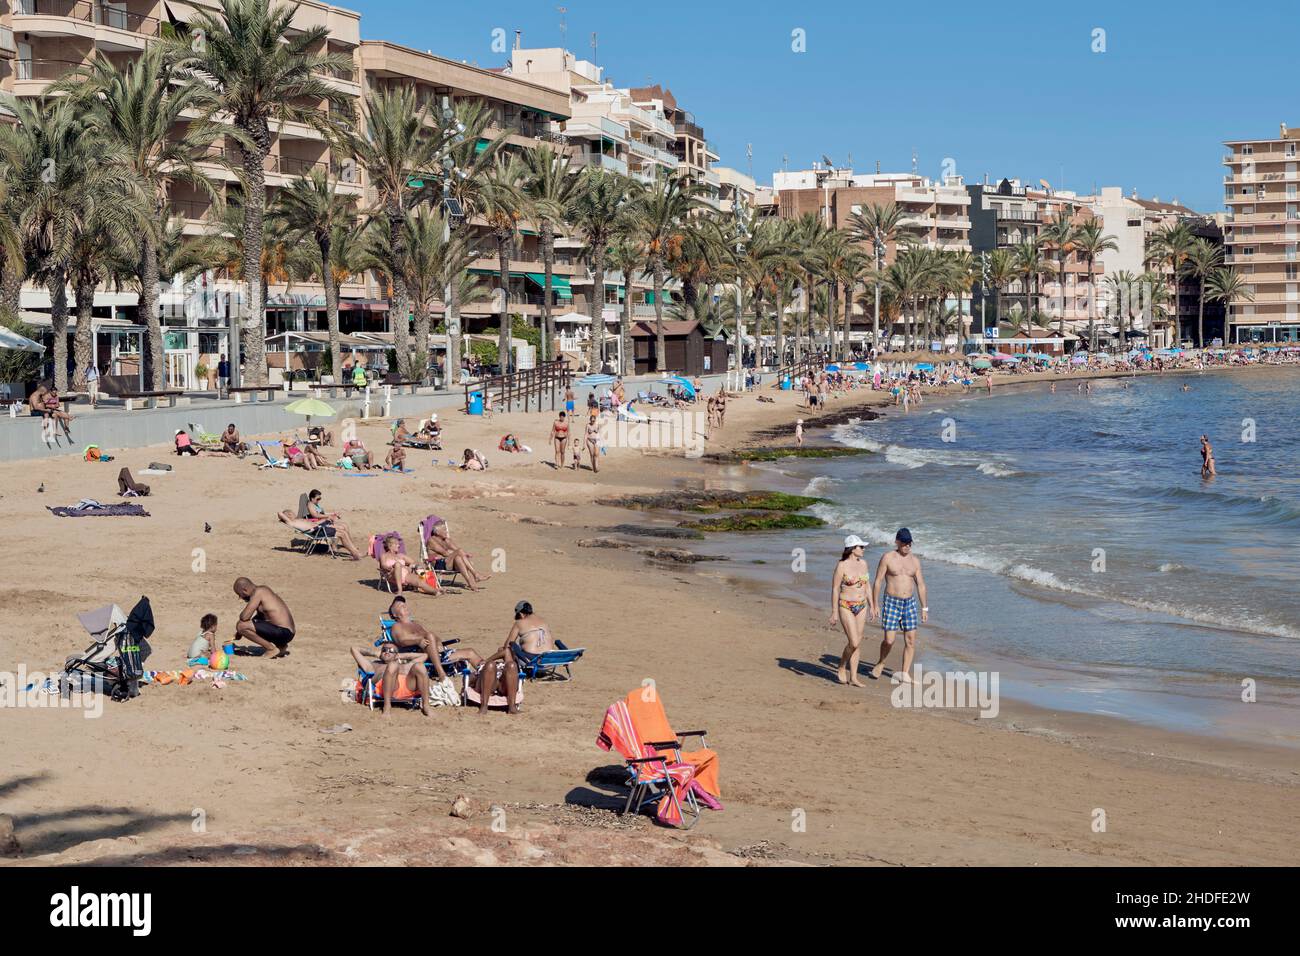 The promenade of Playa del Cura in the town of Torrevieja in the province of Alicante, Valencian Community, Spain, Europe Stock Photo